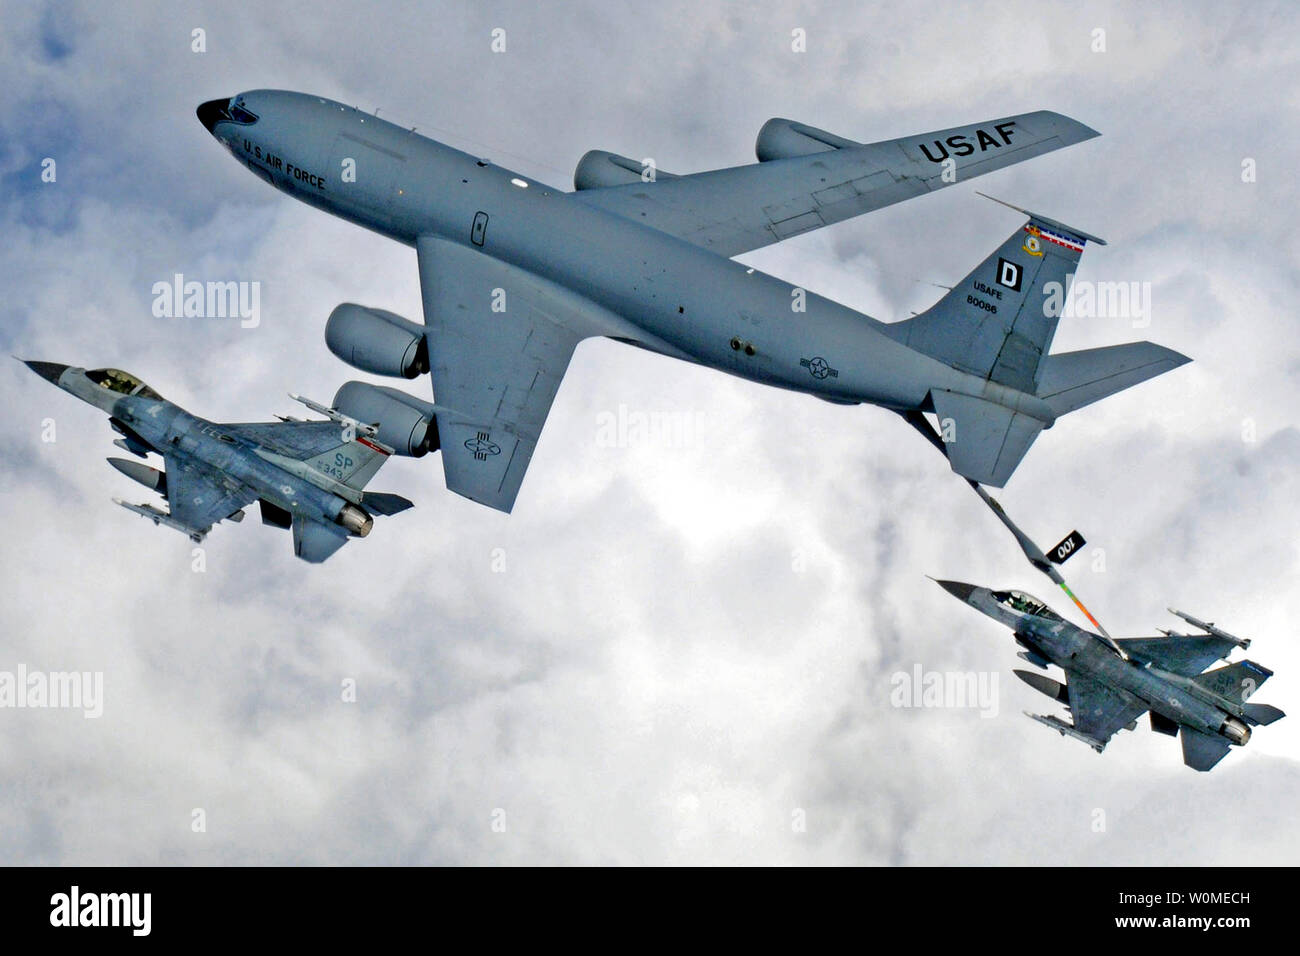 A KC-135 Stratotanker from Royal Air Force Mildenhall, England, refuels a pair of F-16 Fighting Falcons during a multinational exercise over the Baltic States, April 7, 2009. The Stratotankers from RAF Mildenhall feature the 'Box D' tail marking, dating back to World War II. (UPI Photo/Jerry Fleshman/US Air Force) Stock Photo